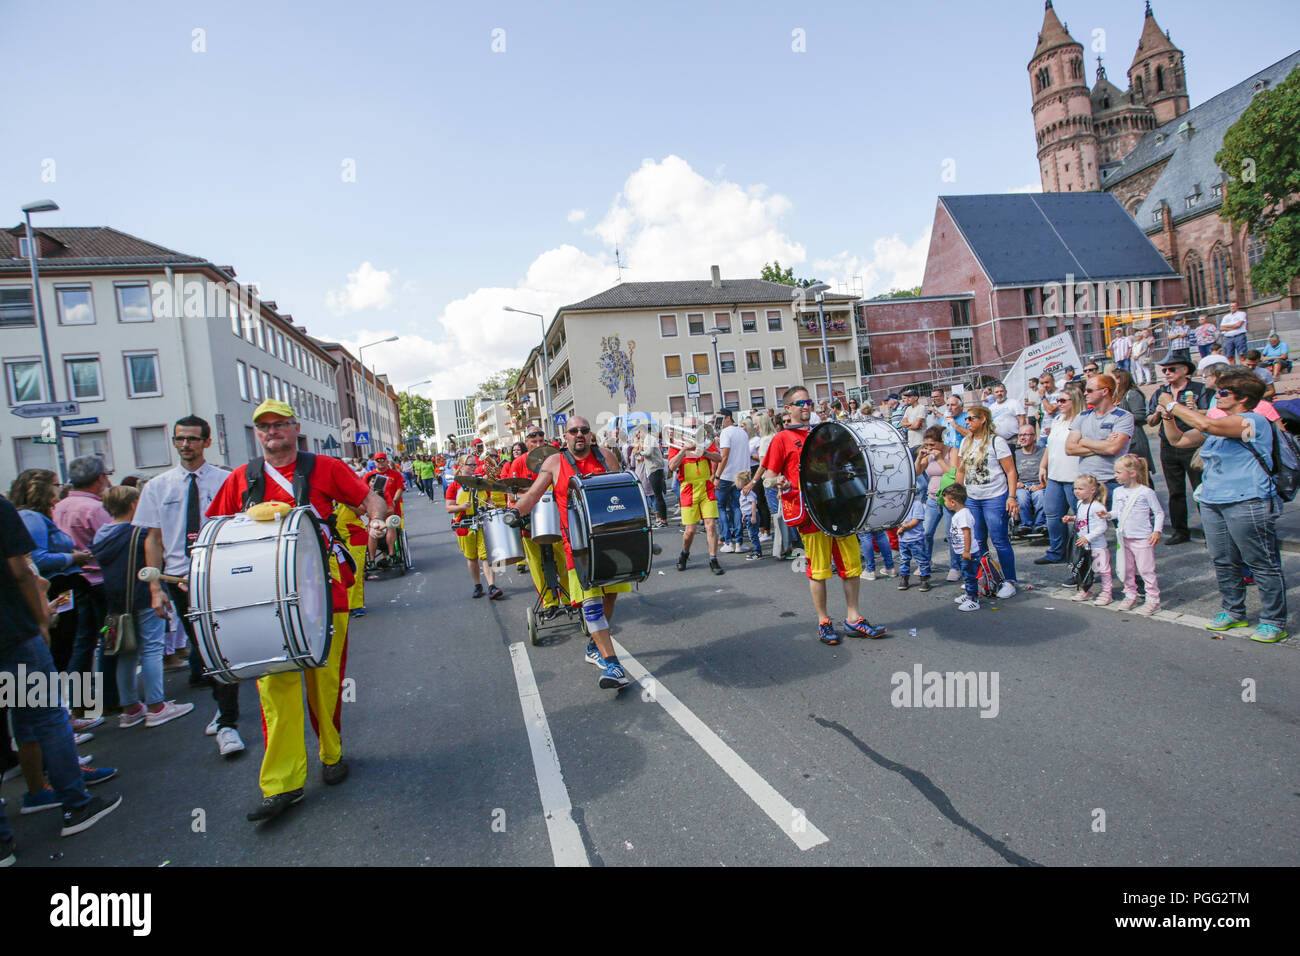 Worms, Germany. 26th August 2018. Members of the Pfalzer-Rhythmusfetzer Landstuhl Guggenmusik band perform in the parade. The first highlight of the 2018 Backfischfest was the big parade through the city of Worms with over 70 groups and floats. Community groups, music groups and businesses from Worms and further afield took part. Credit: Michael Debets/Alamy Live News Stock Photo